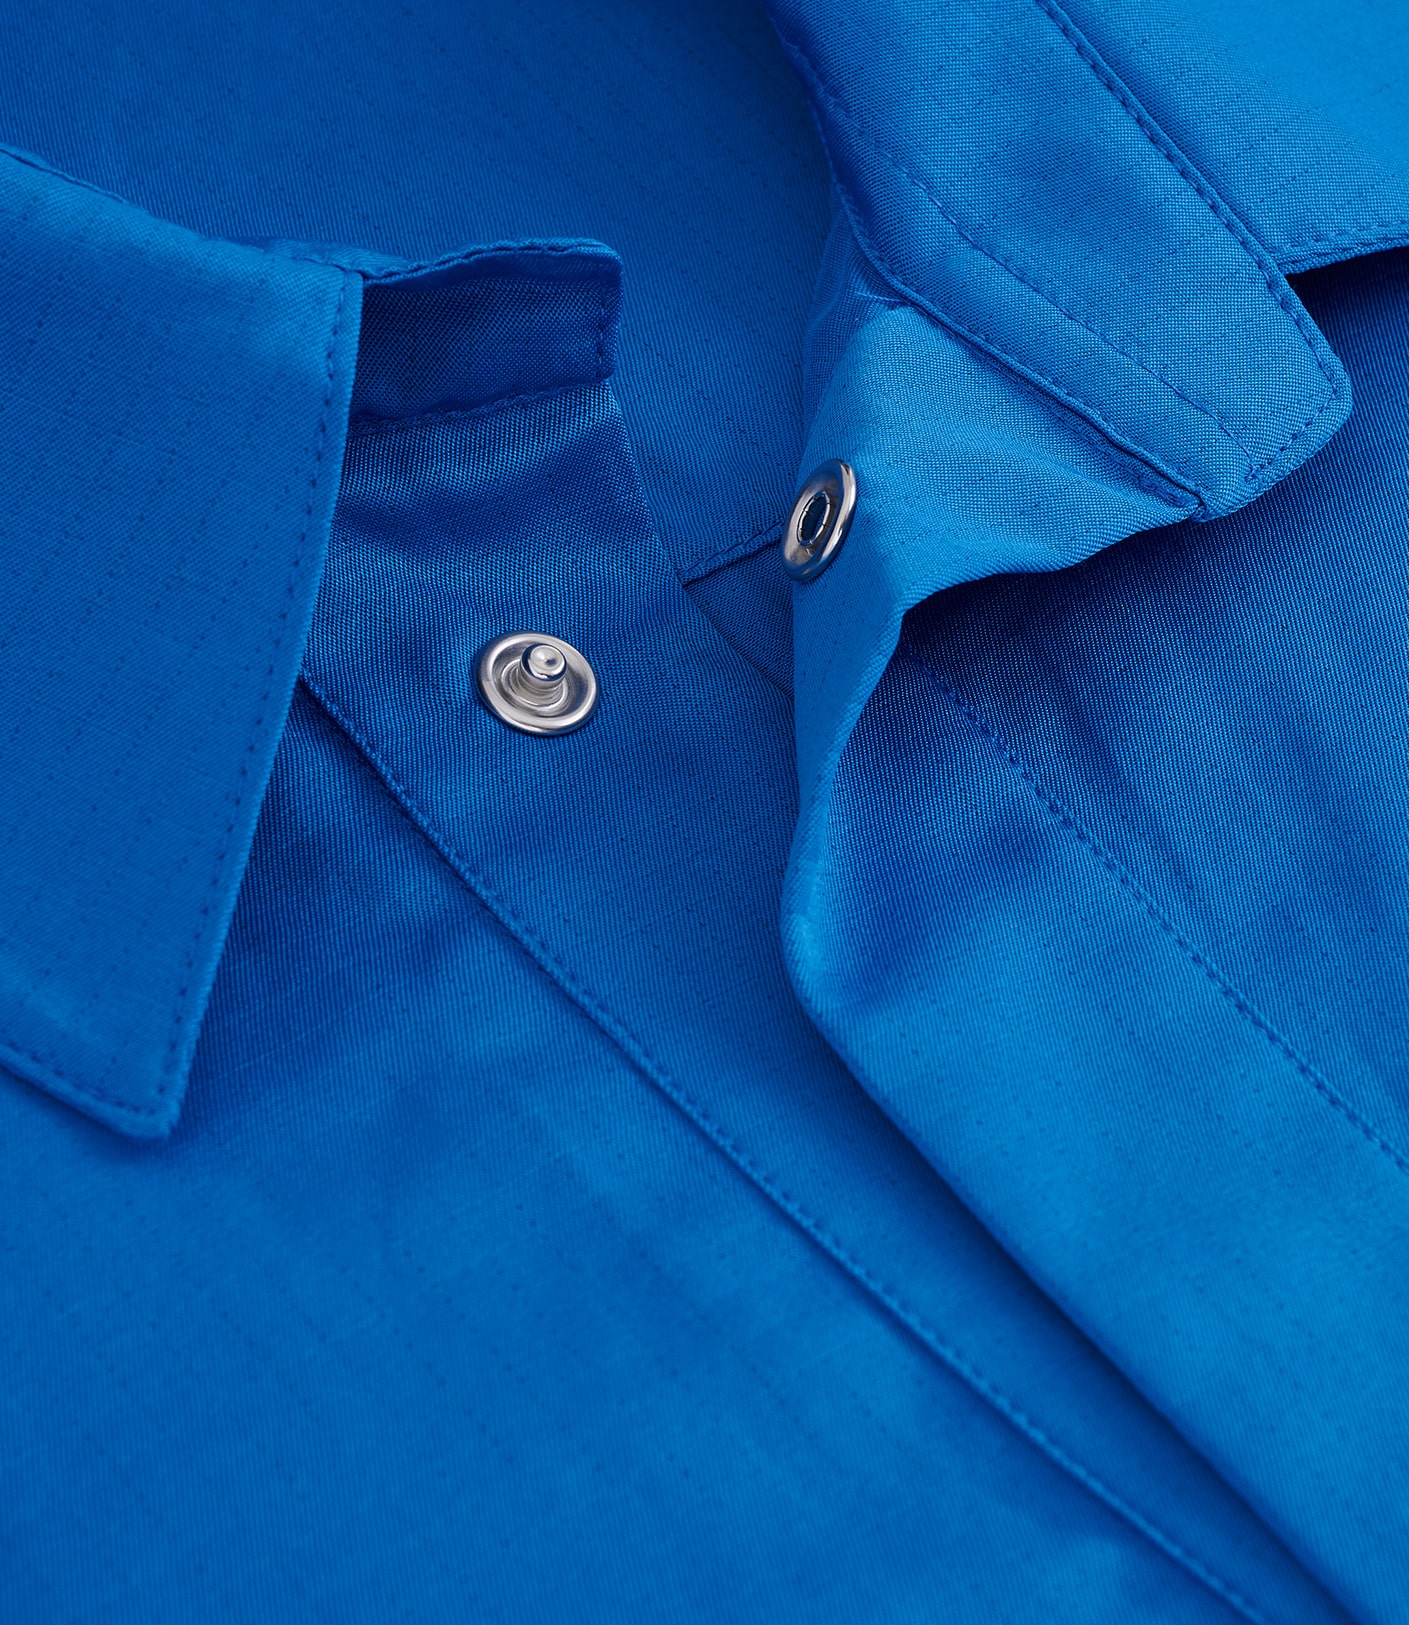 Detail photo of a royal blue lab coat, a close-up product photography for online store